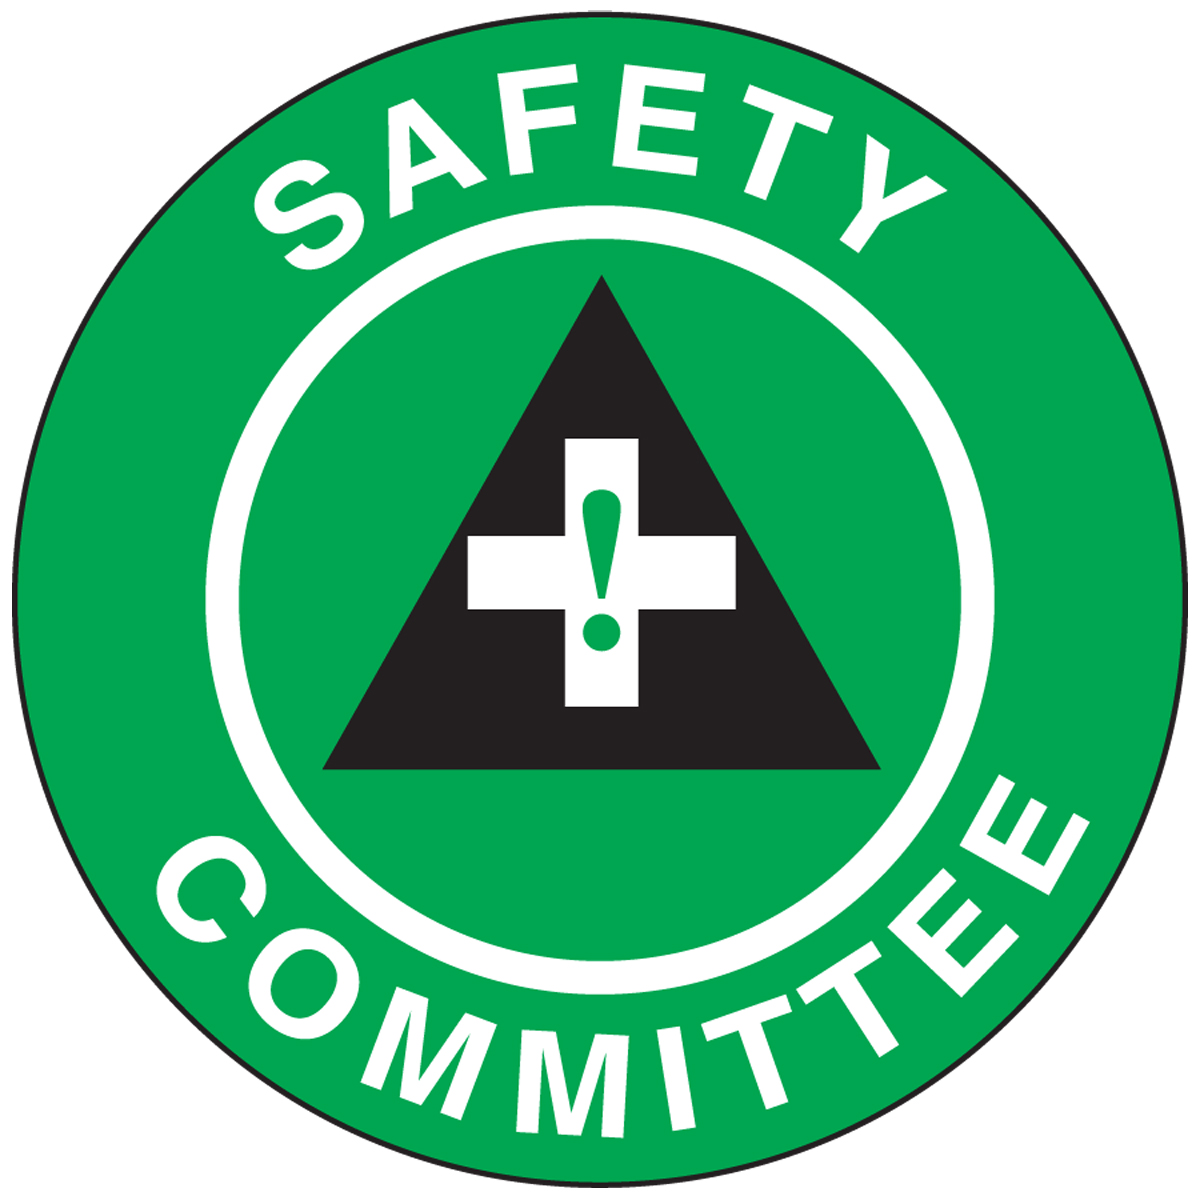 SAFETY COMMITTEE